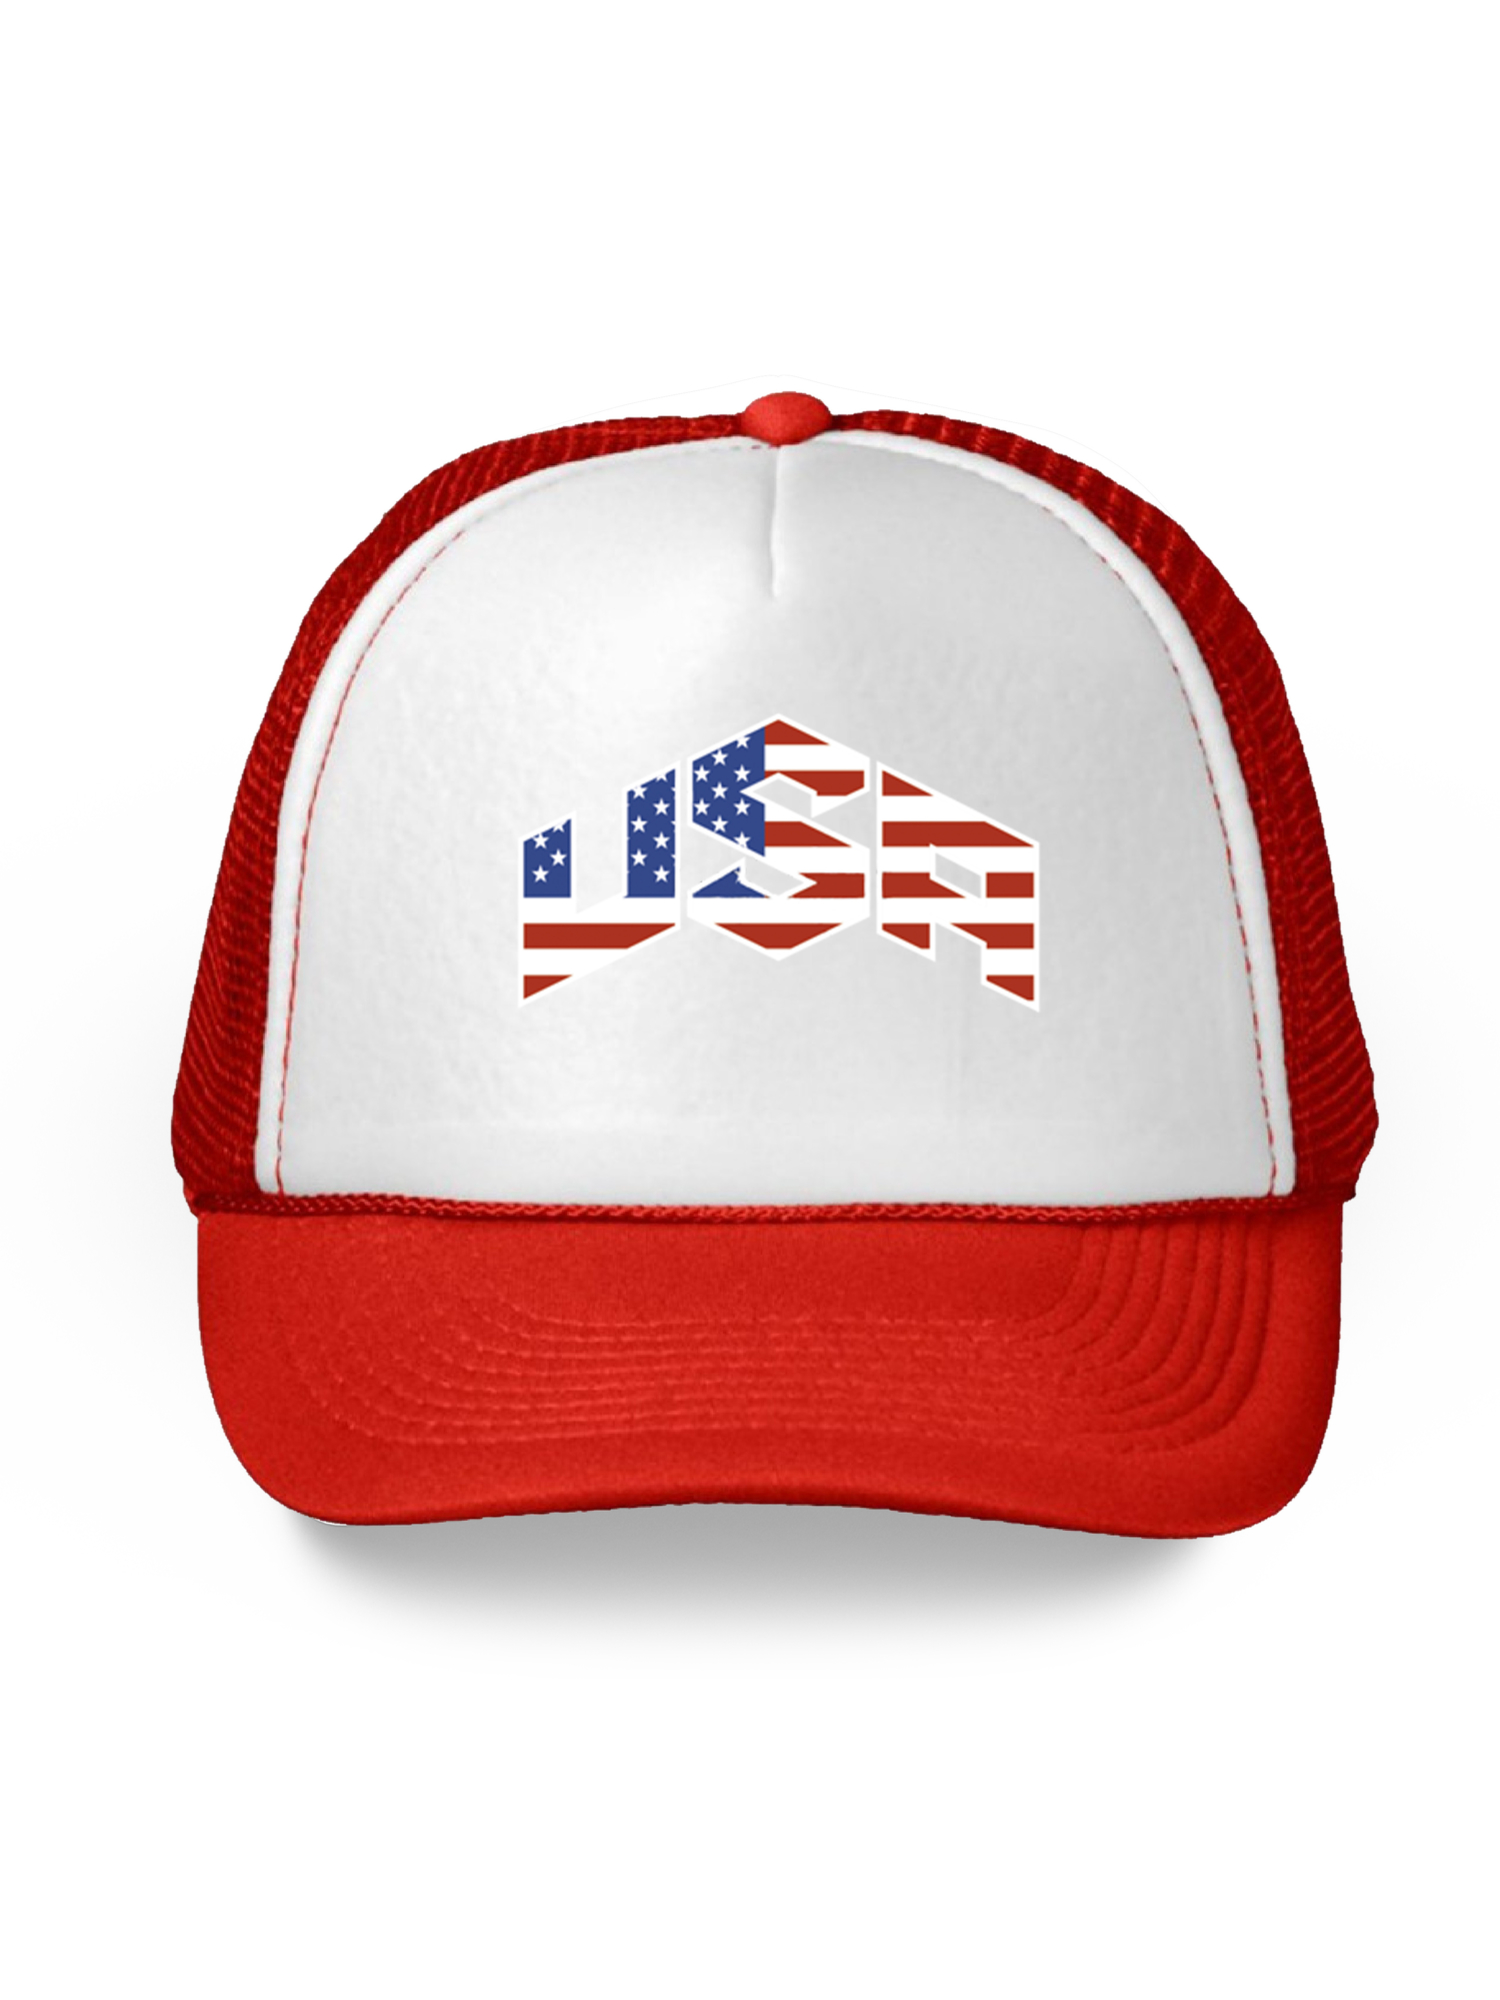 Awkward Styles USA Hat American Flag Trucker Hat for Women Men Patriotic Gifts American Flag Hat USA Baseball Cap Patriotic Hat American Flag Men Women 4th of July Hat 4th of July Accessories - image 1 of 6